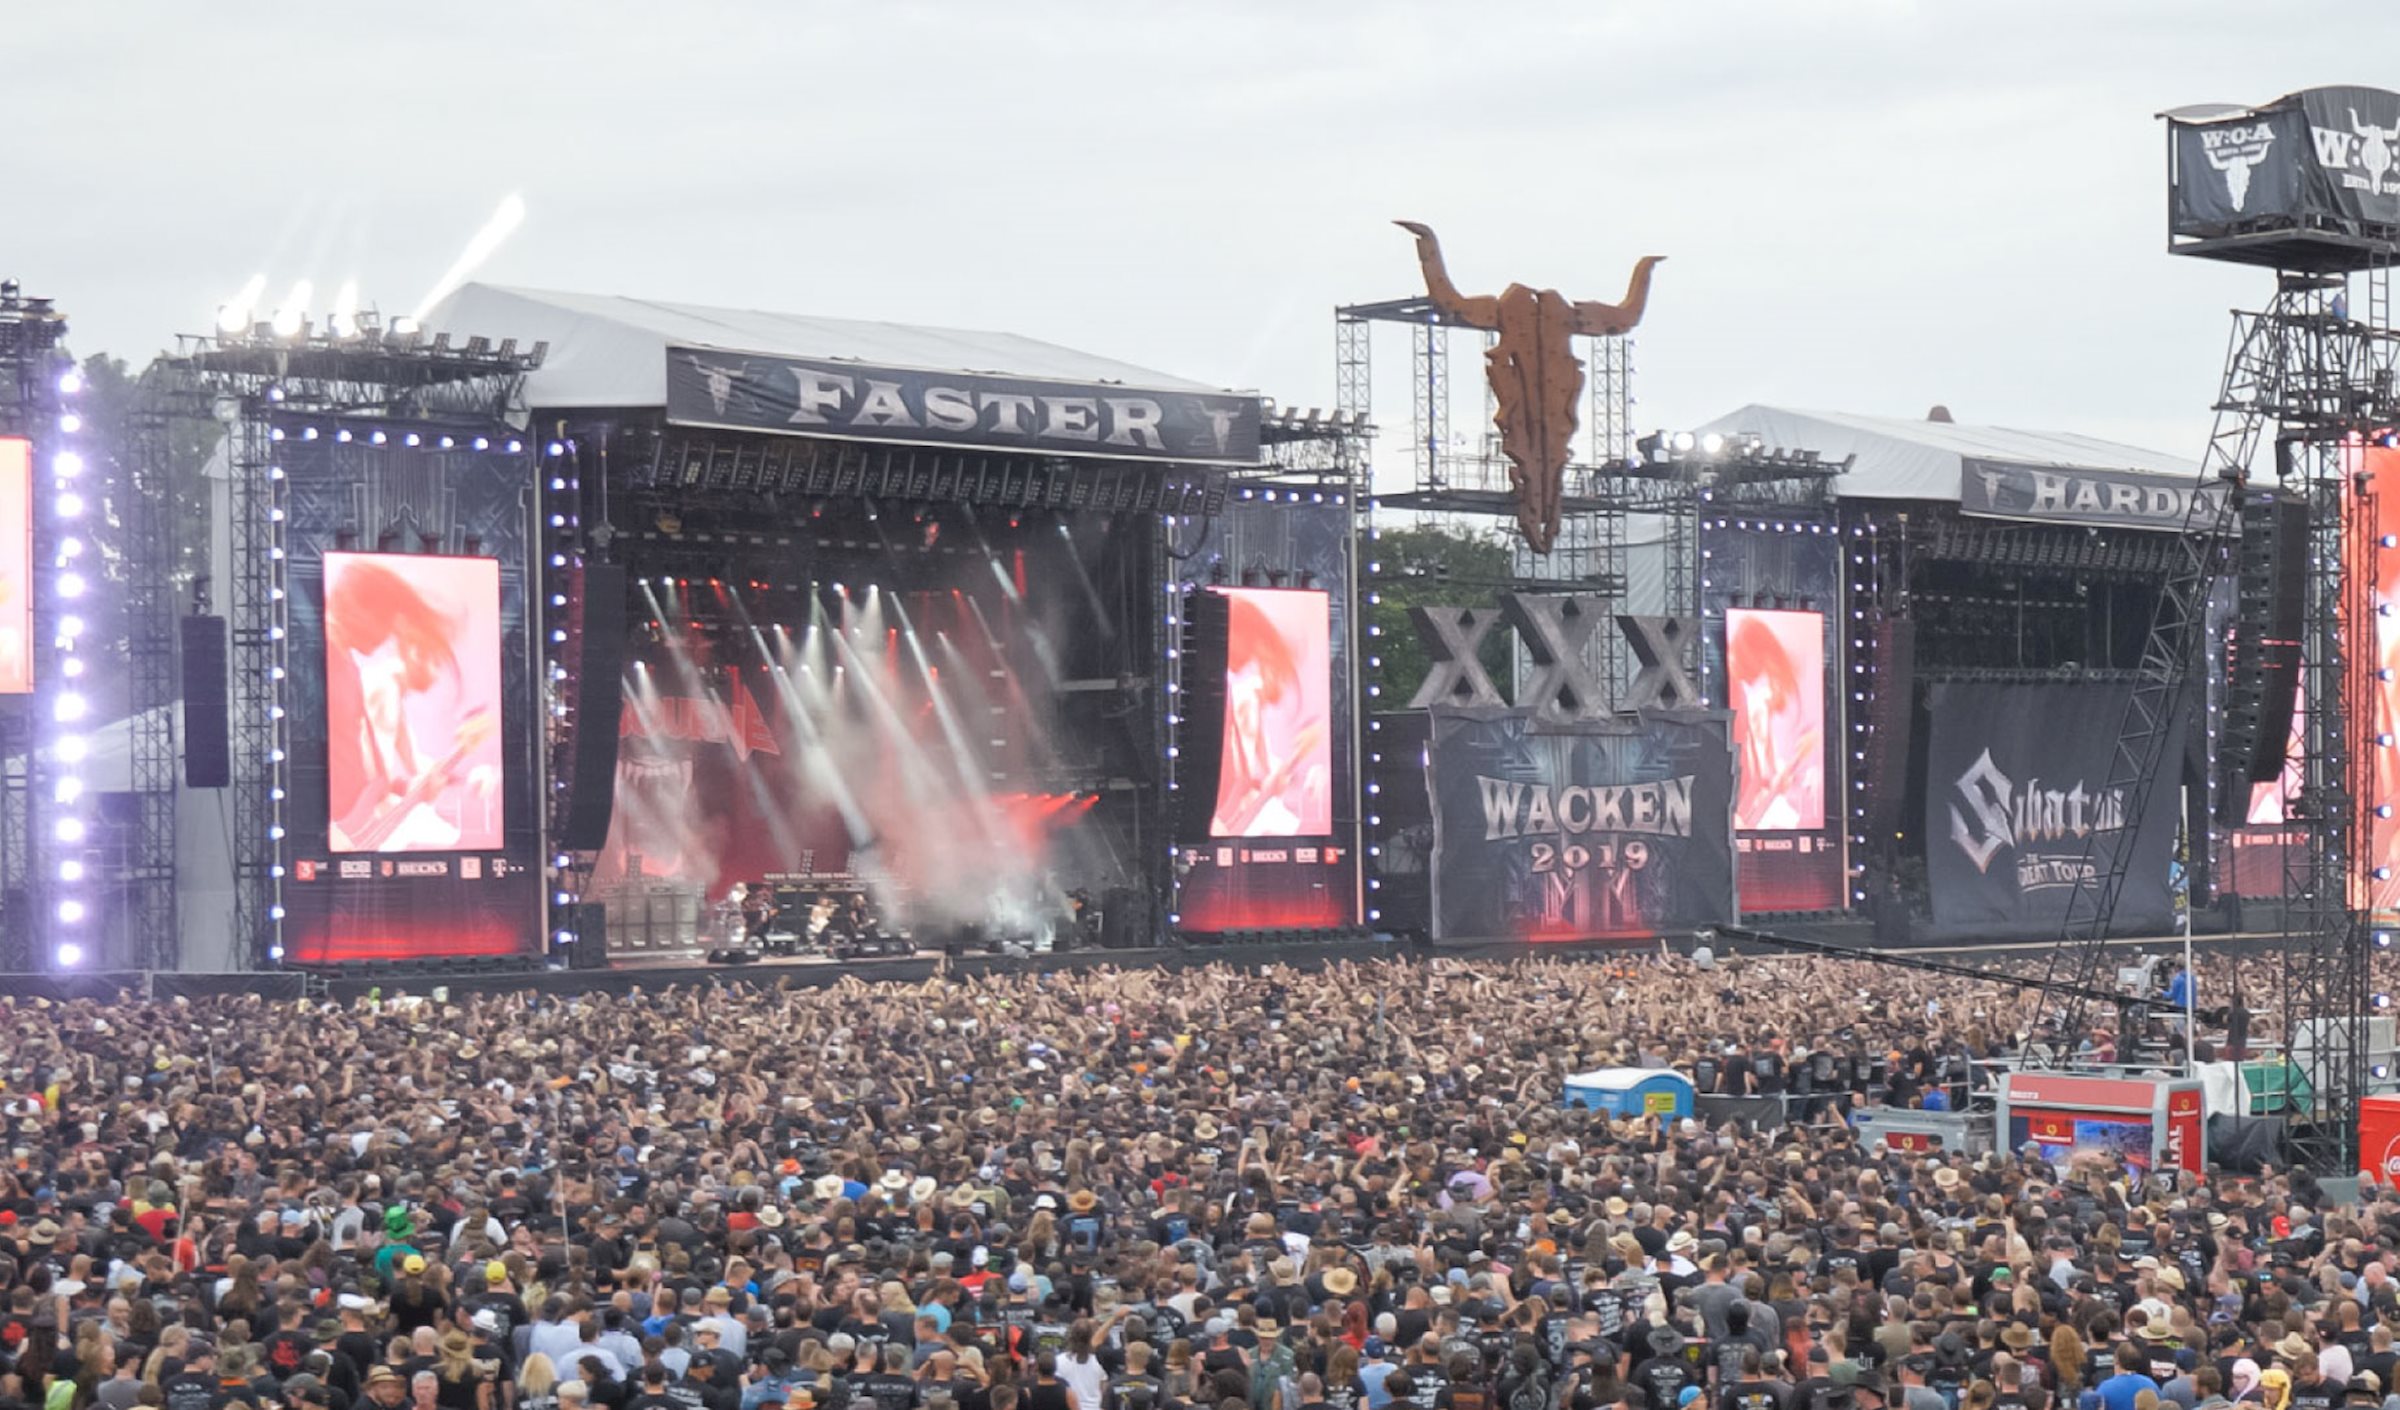 PRG has been part of the action, taking care of all the lighting and LED technology as well as rigging for the Wacken Open Air 2019